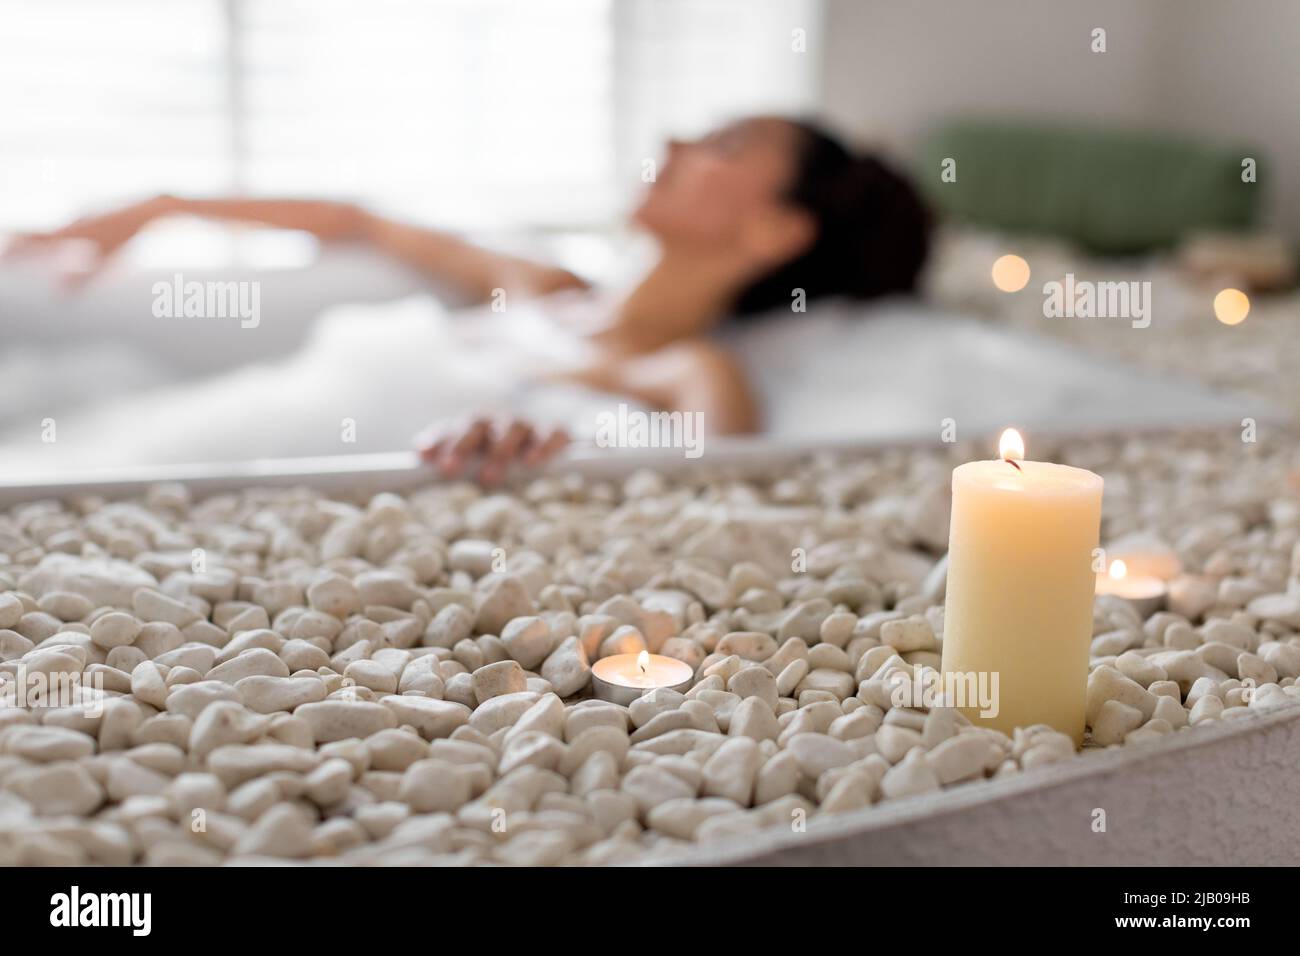 Millennial woman relaxing in bathtub with foam, having spa day at home, selective focus on candles and pebbles Stock Photo